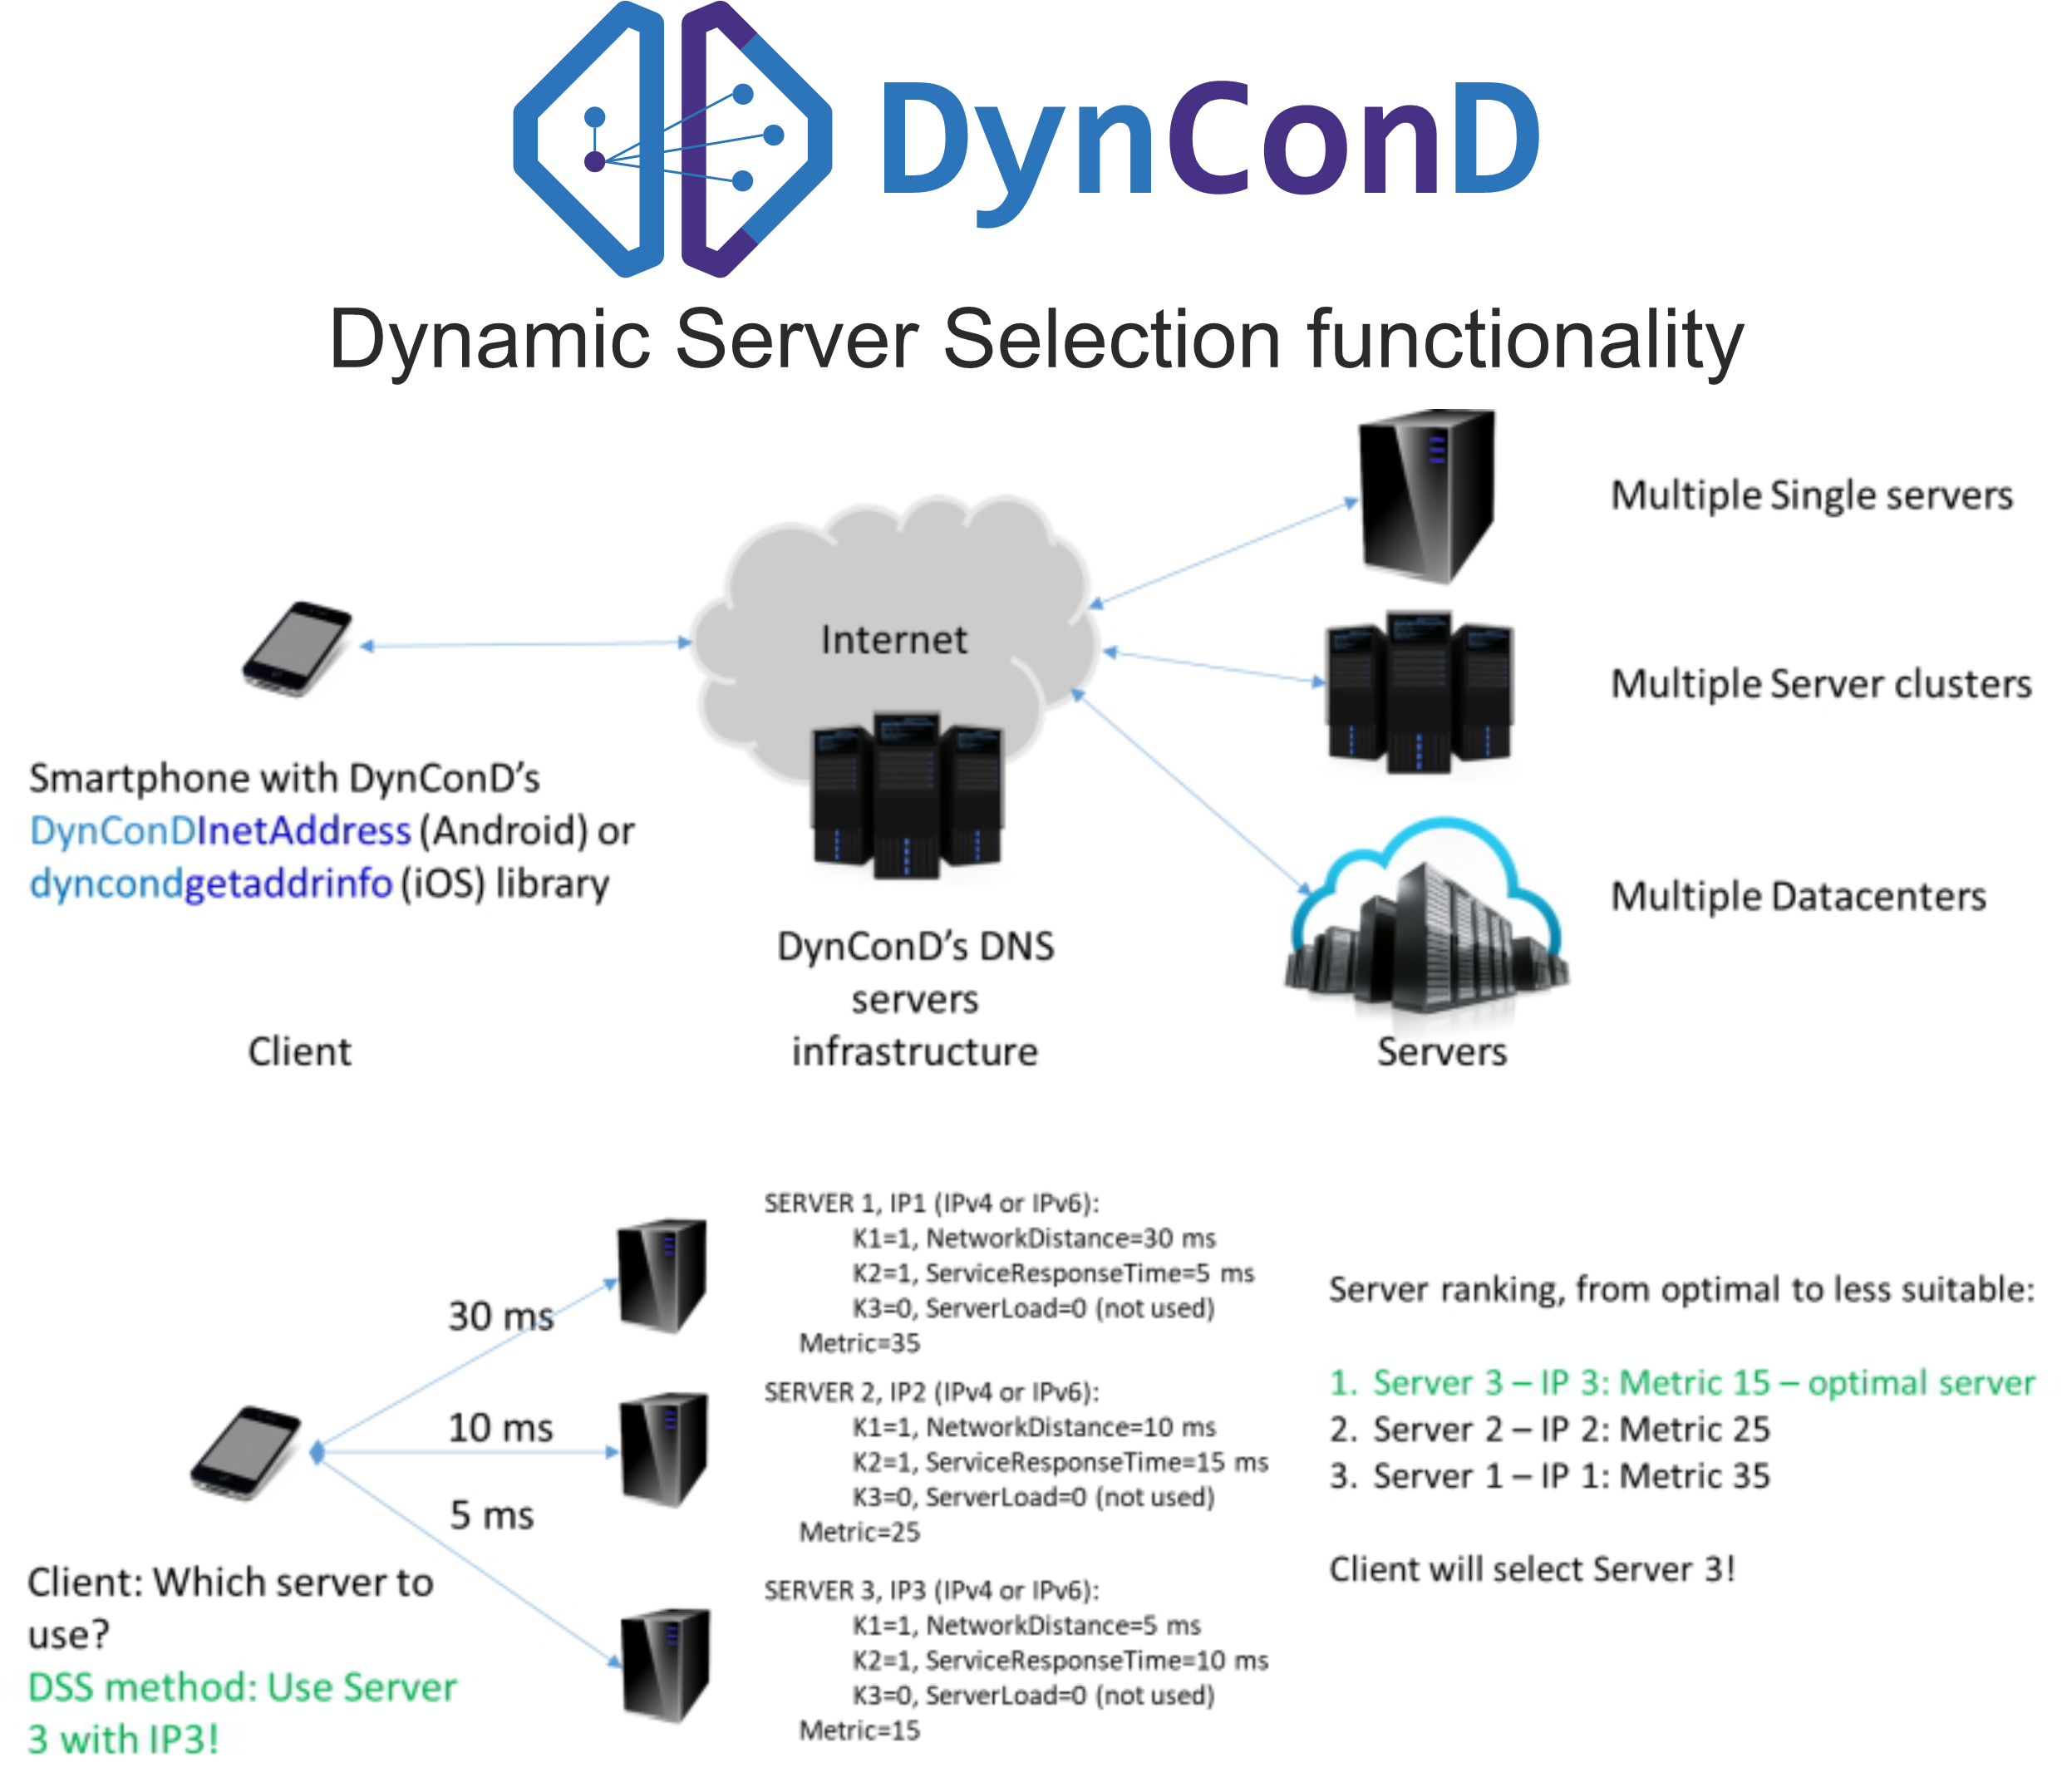 Dynamic Server Selection process functionality which determines the optimal server for each client